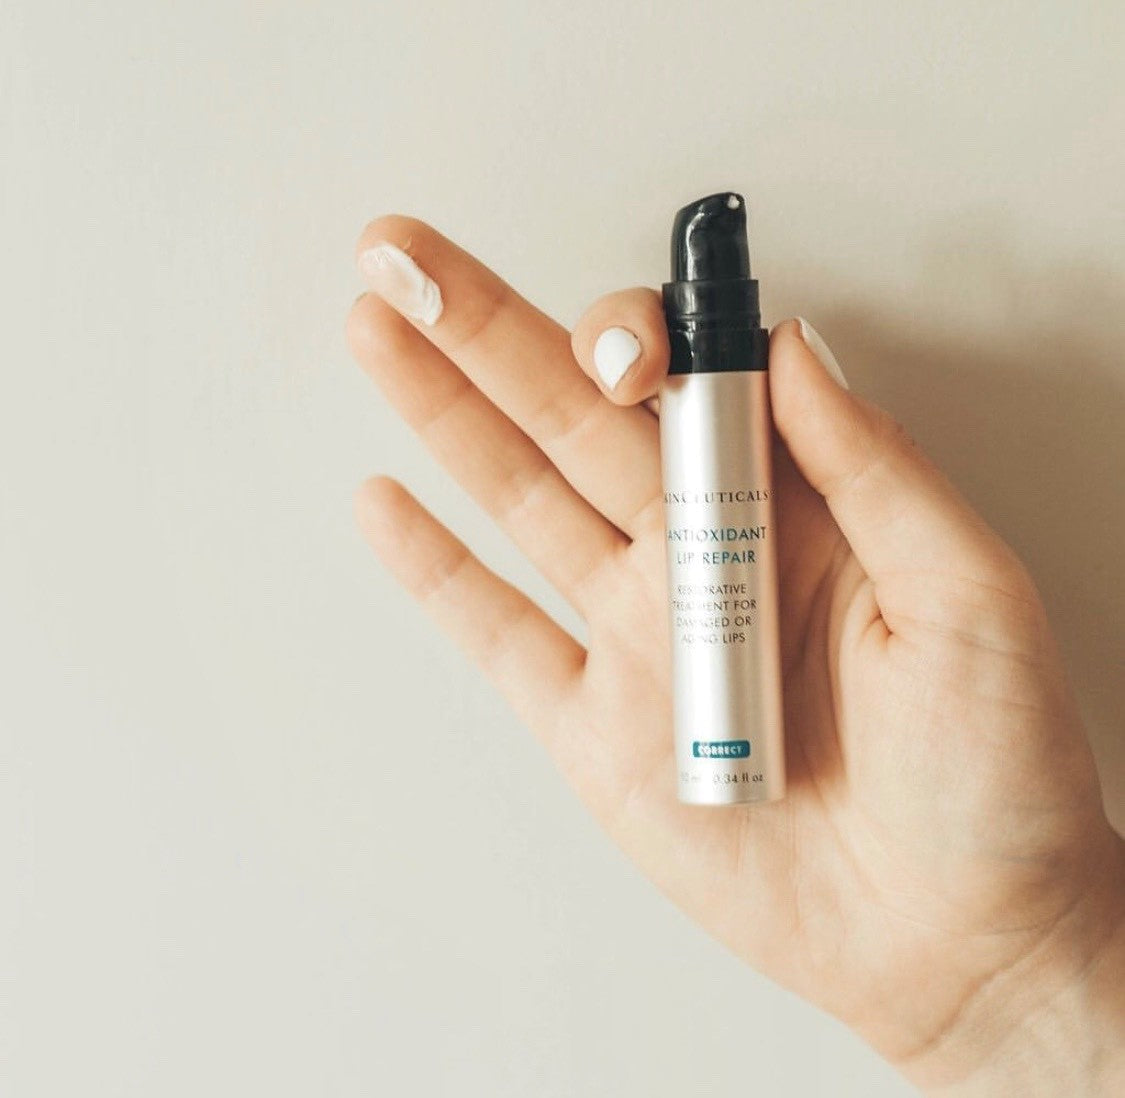 SKINCEUTICALS AOX Lip Repair 10ml: Nourish and protect your lips with SKINCEUTICALS AOX Lip Repair, a targeted lip treatment enriched with antioxidants that helps to hydrate, smooth, and restore the delicate skin of the lips, promoting a plump, healthy-looking pout.